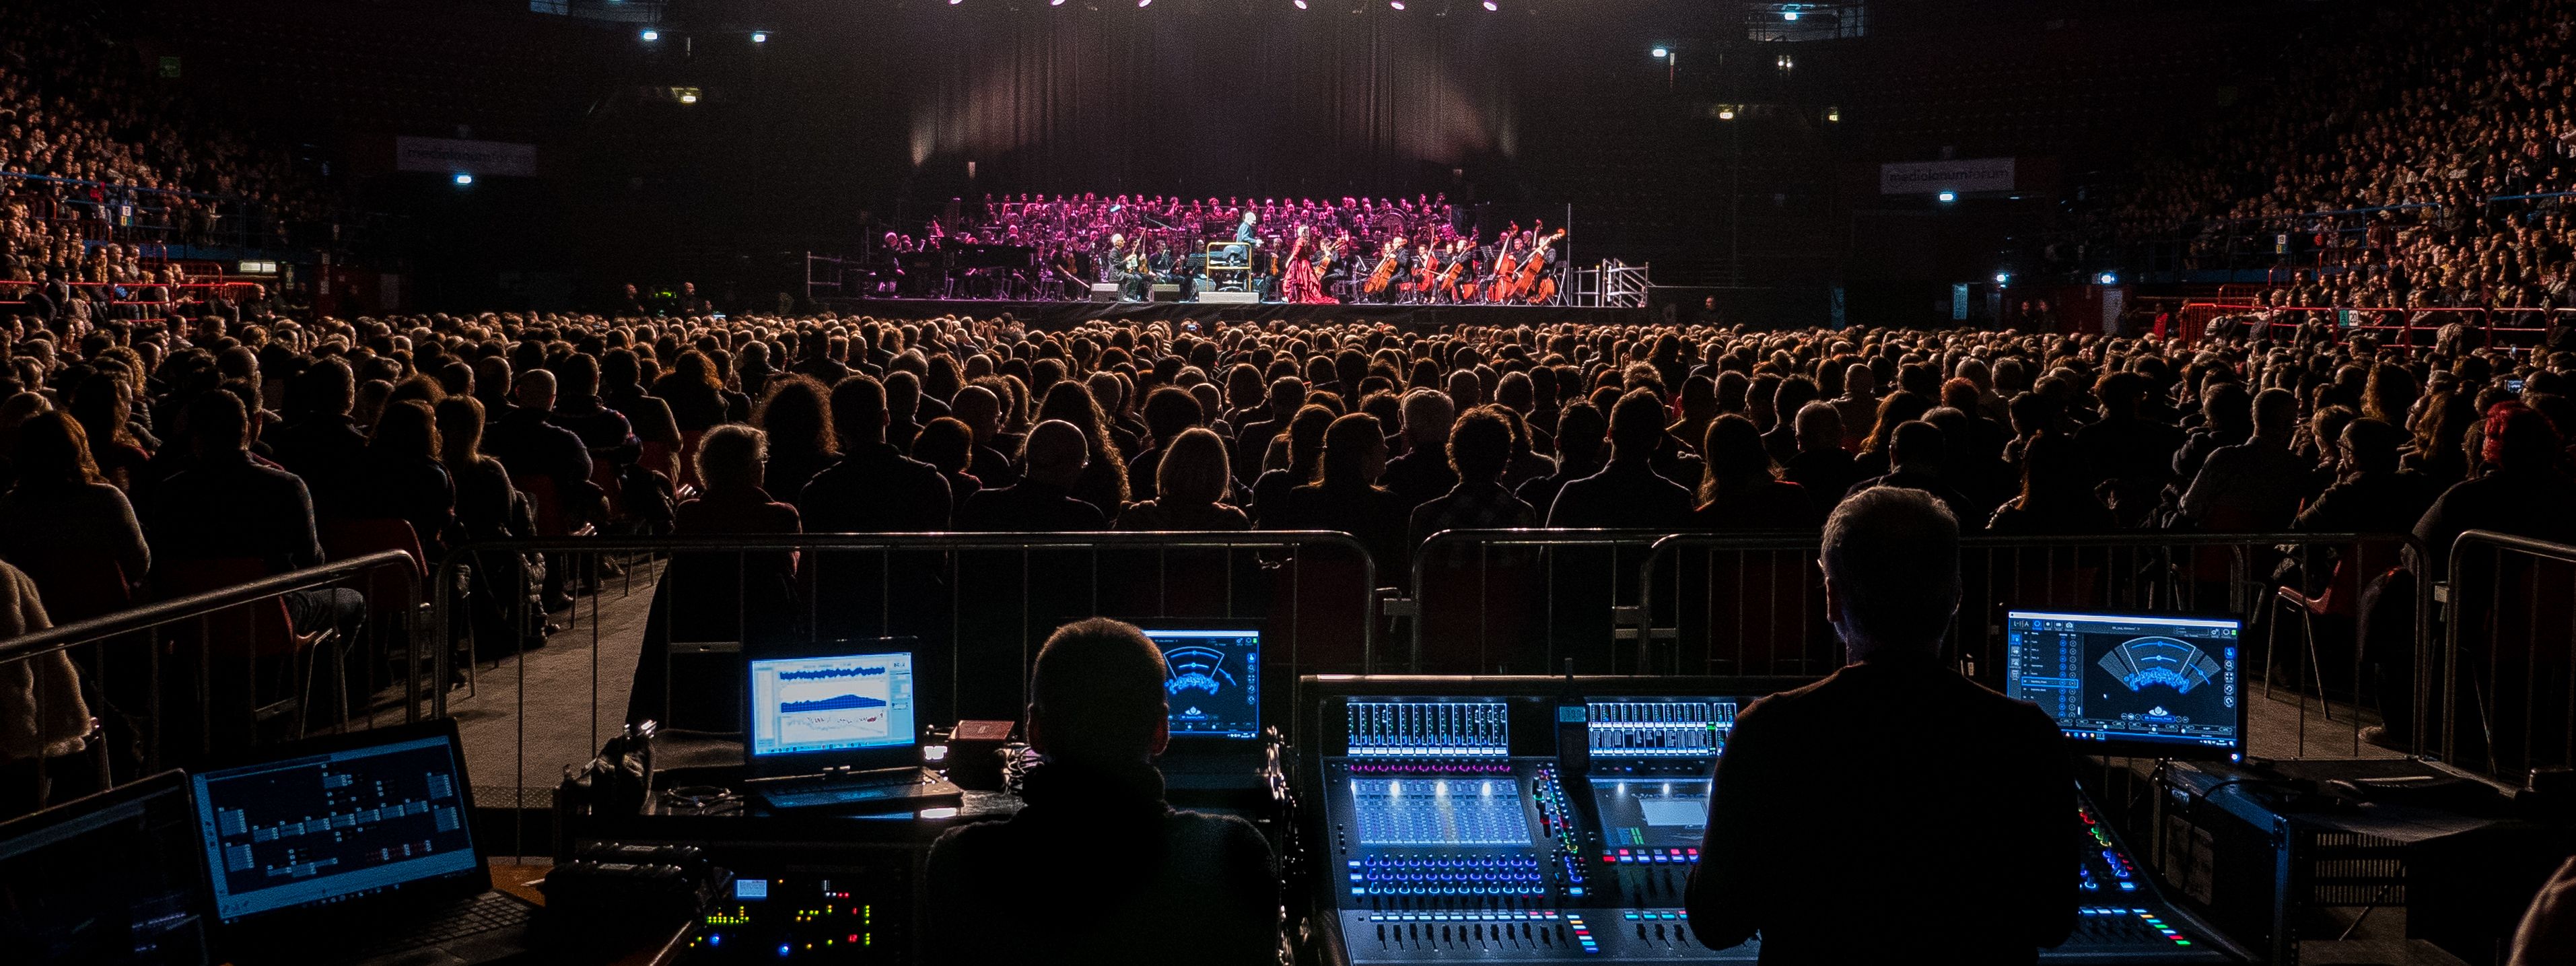 Ennio Morricone Immerses Audience In 60 Years Of Music With L-ISA